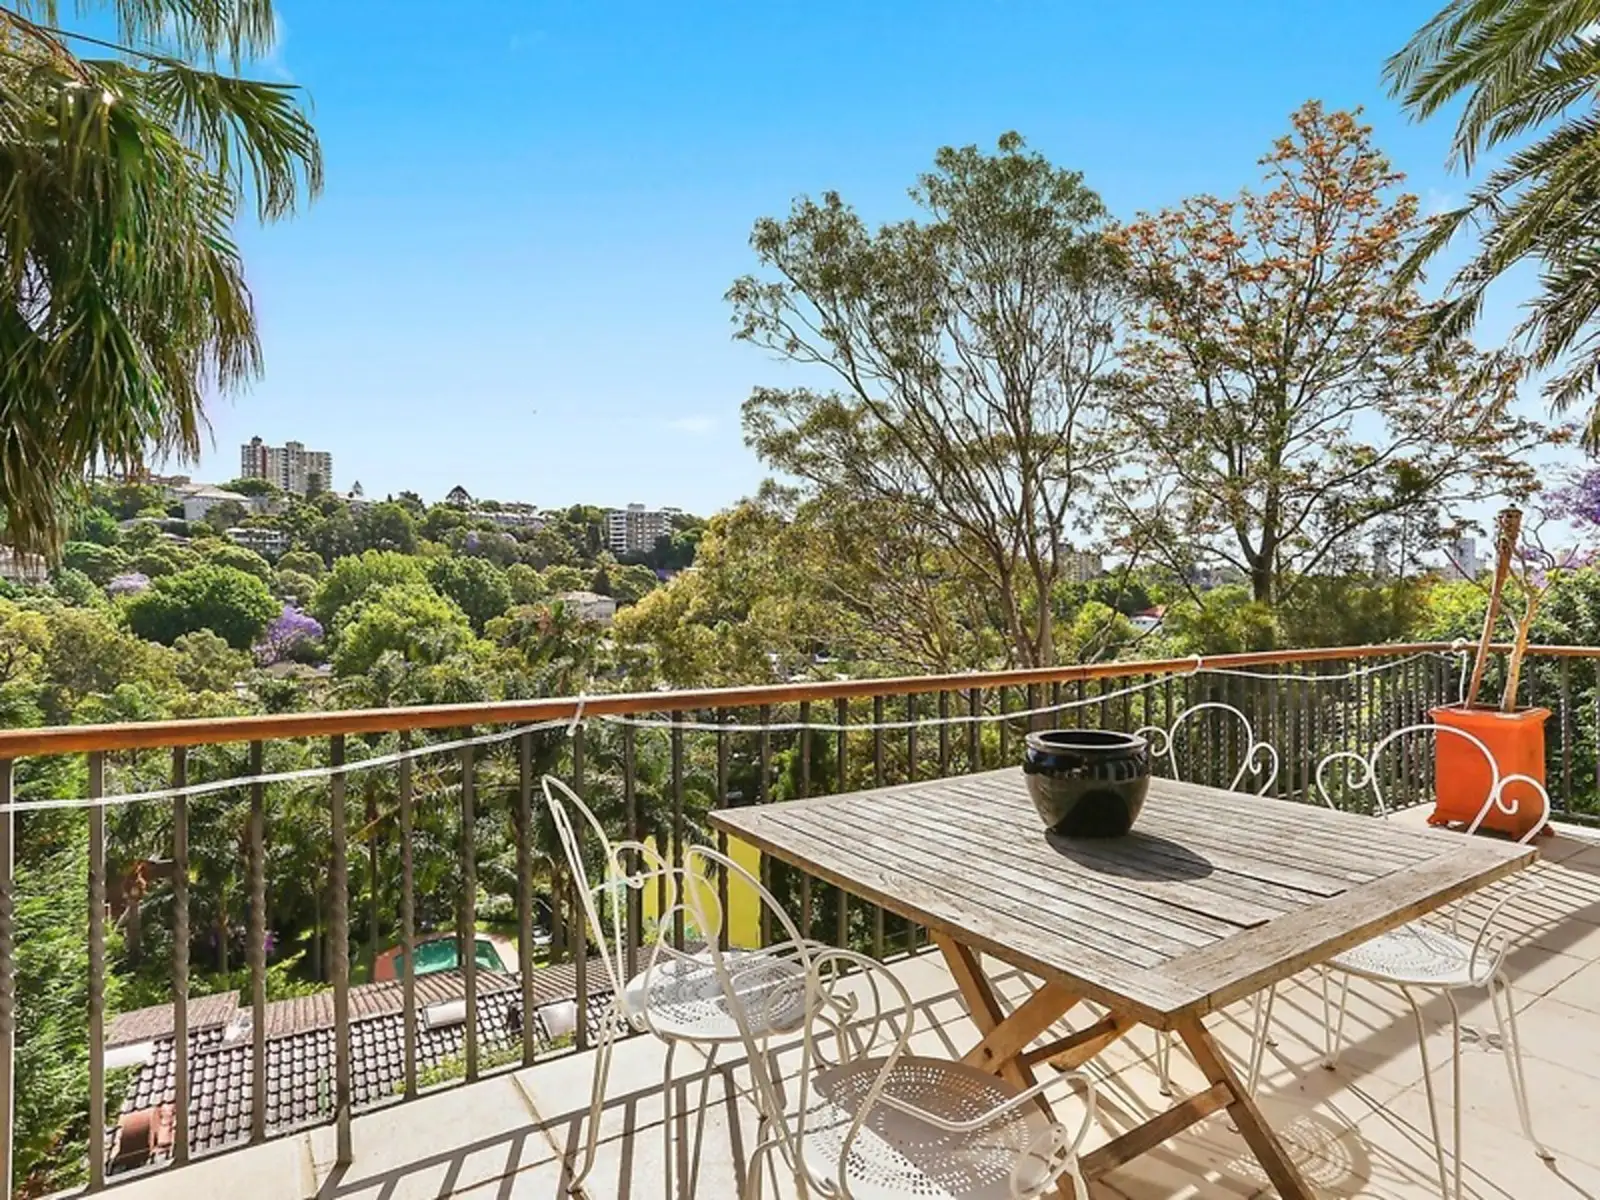 Photo #3: 53a Carlotta Road, Double Bay - Sold by Sydney Sotheby's International Realty